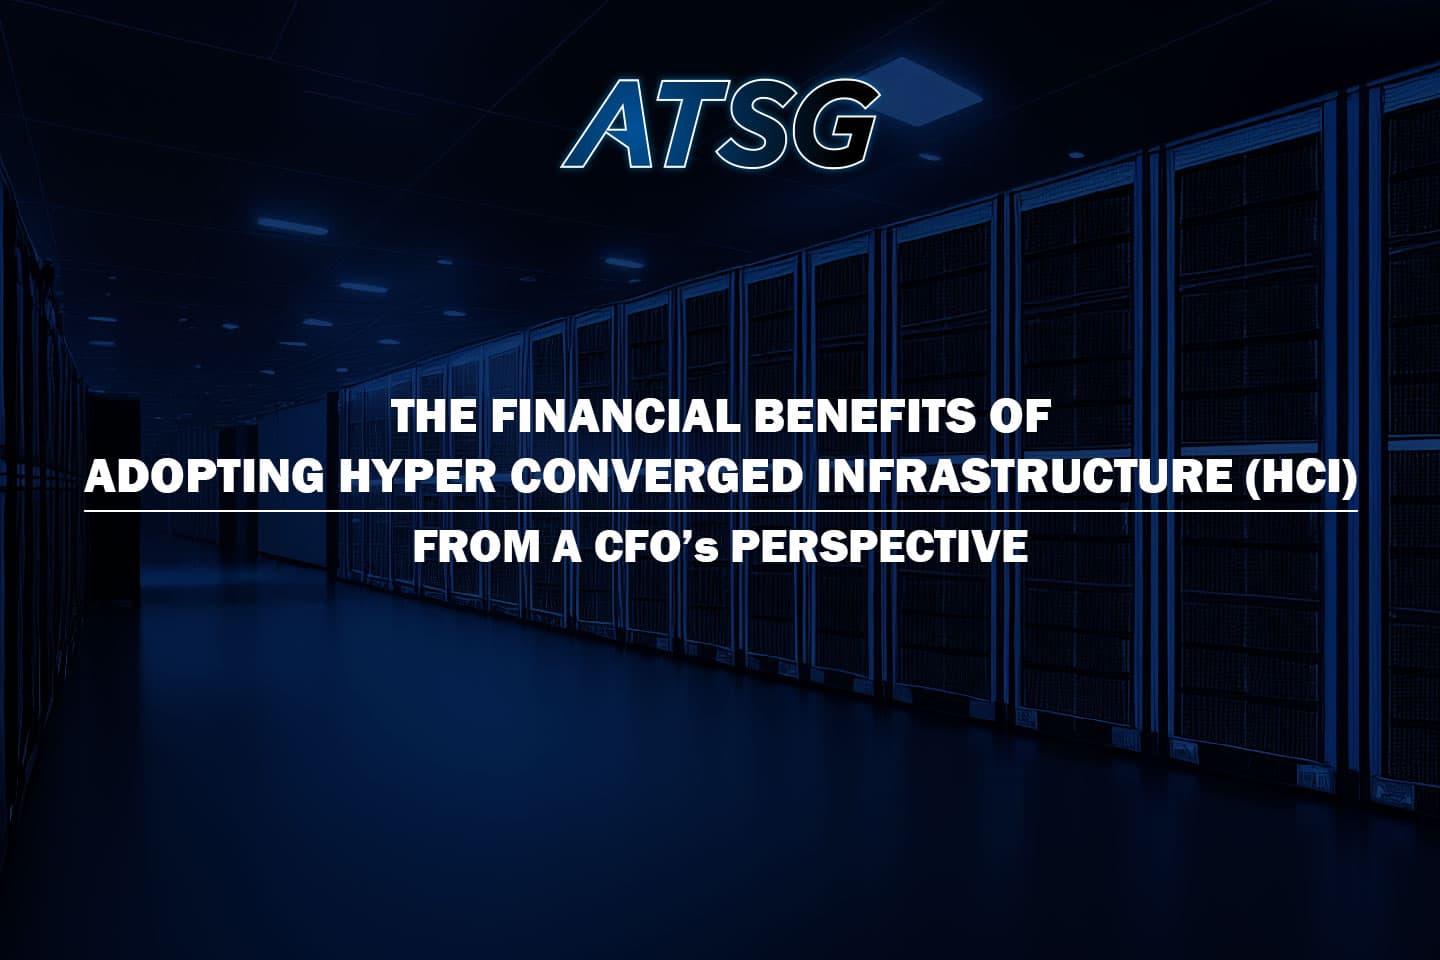 The-Financial-Benefits-of-Adopting-Hyper-Converged-Infrastructure-from-a-CFOs-Perspective-Featured